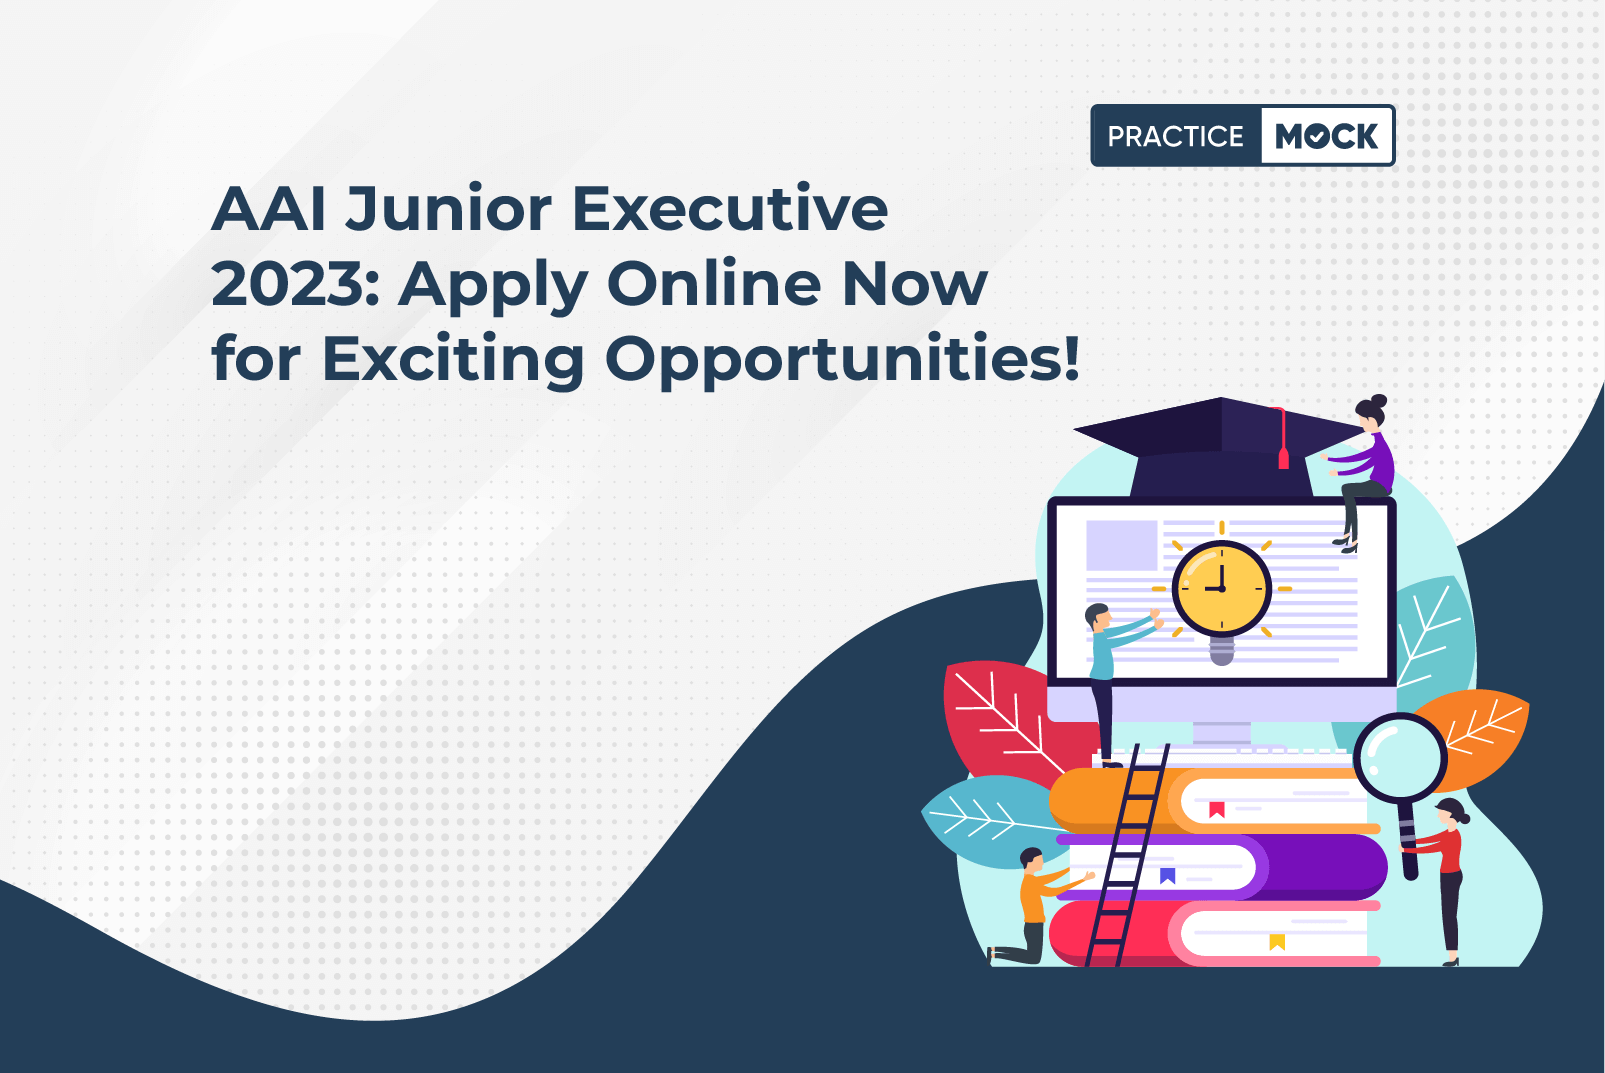 AAI Junior Executive 2023: Apply Online Now for Exciting Opportunities!